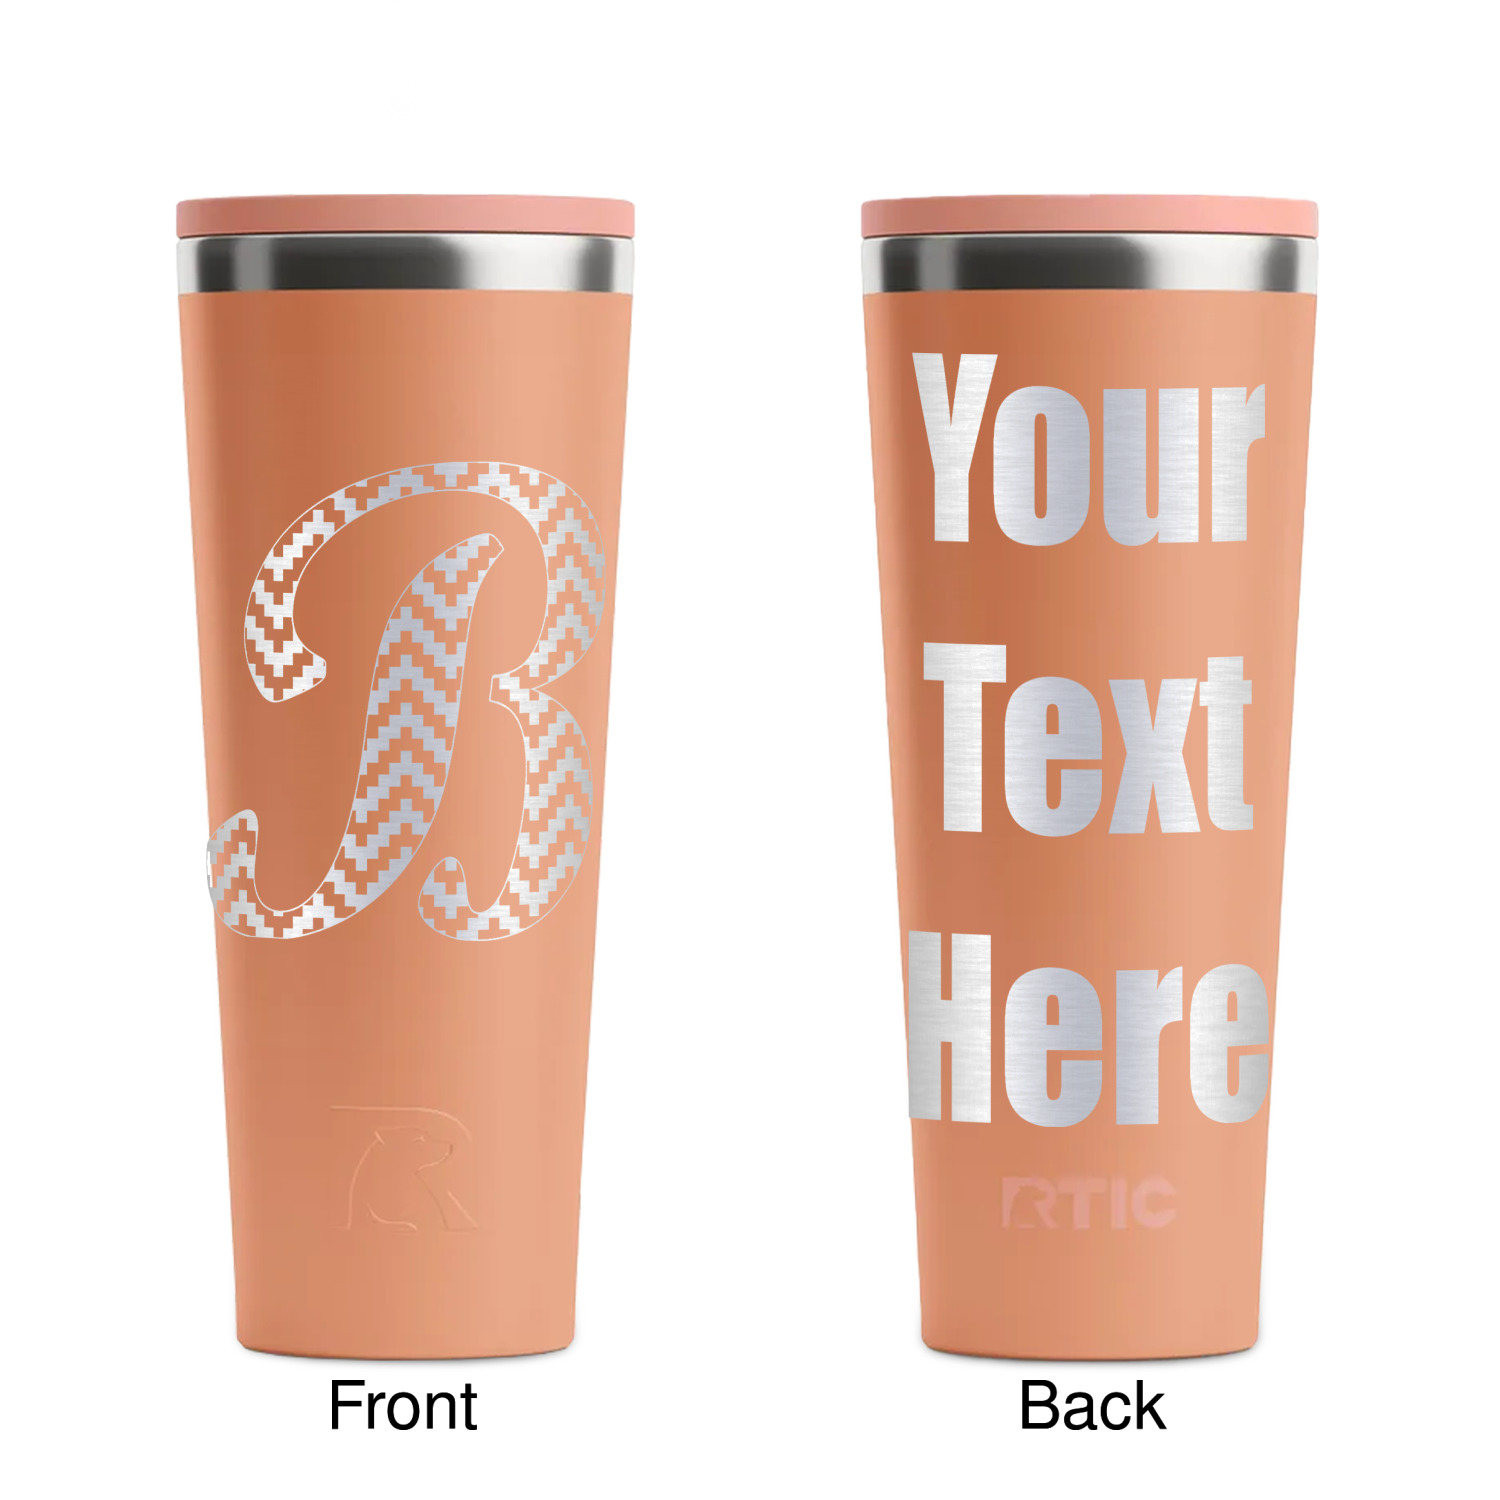 https://www.youcustomizeit.com/common/MAKE/163634/Pixelated-Chevron-Peach-RTIC-Everyday-Tumbler-28-oz-Front-and-Back.jpg?lm=1698257457